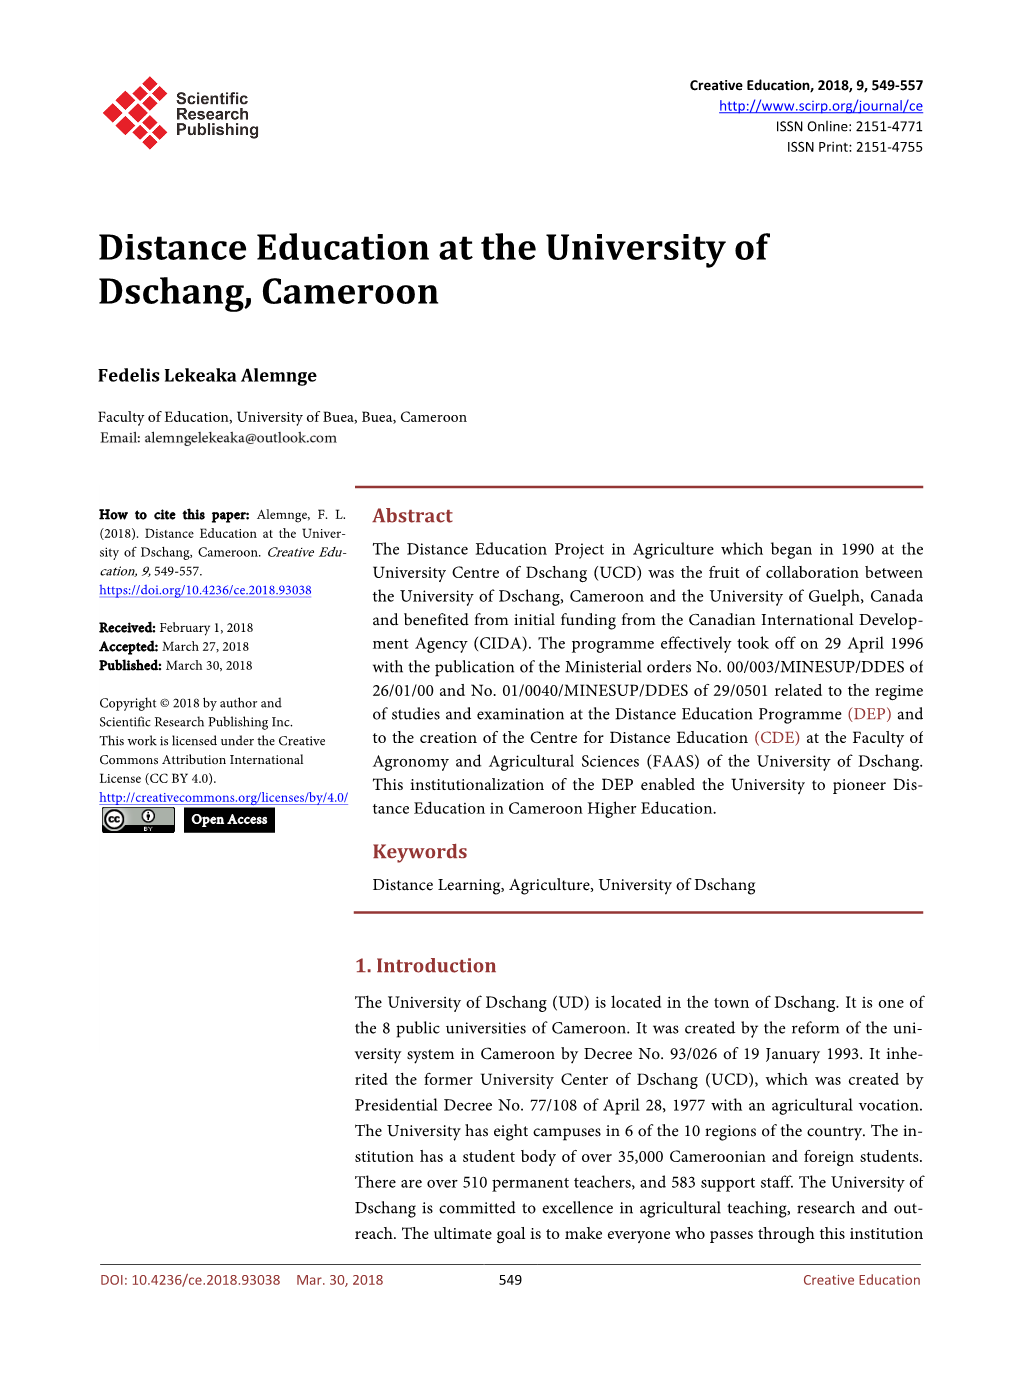 Distance Education at the University of Dschang, Cameroon